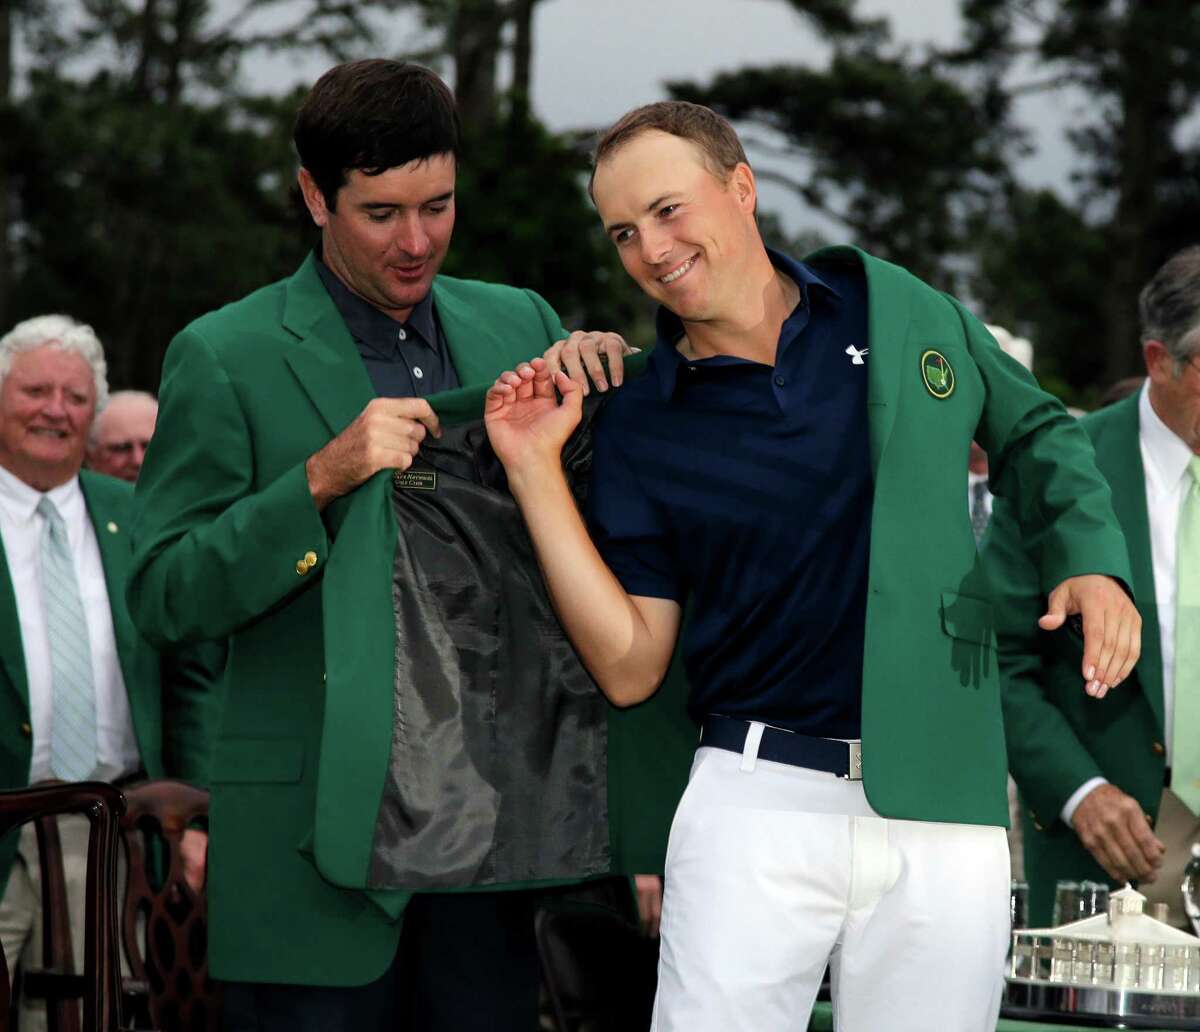 Bubba Watson, who won in 2014, gives Jordan Spieth a helping hand with the champion's traditional green jacket after the 21-year-old Texan became the Masters' first wire-to-wire winner since 1976 and tied the 72-hole scoring record of 18 under par.